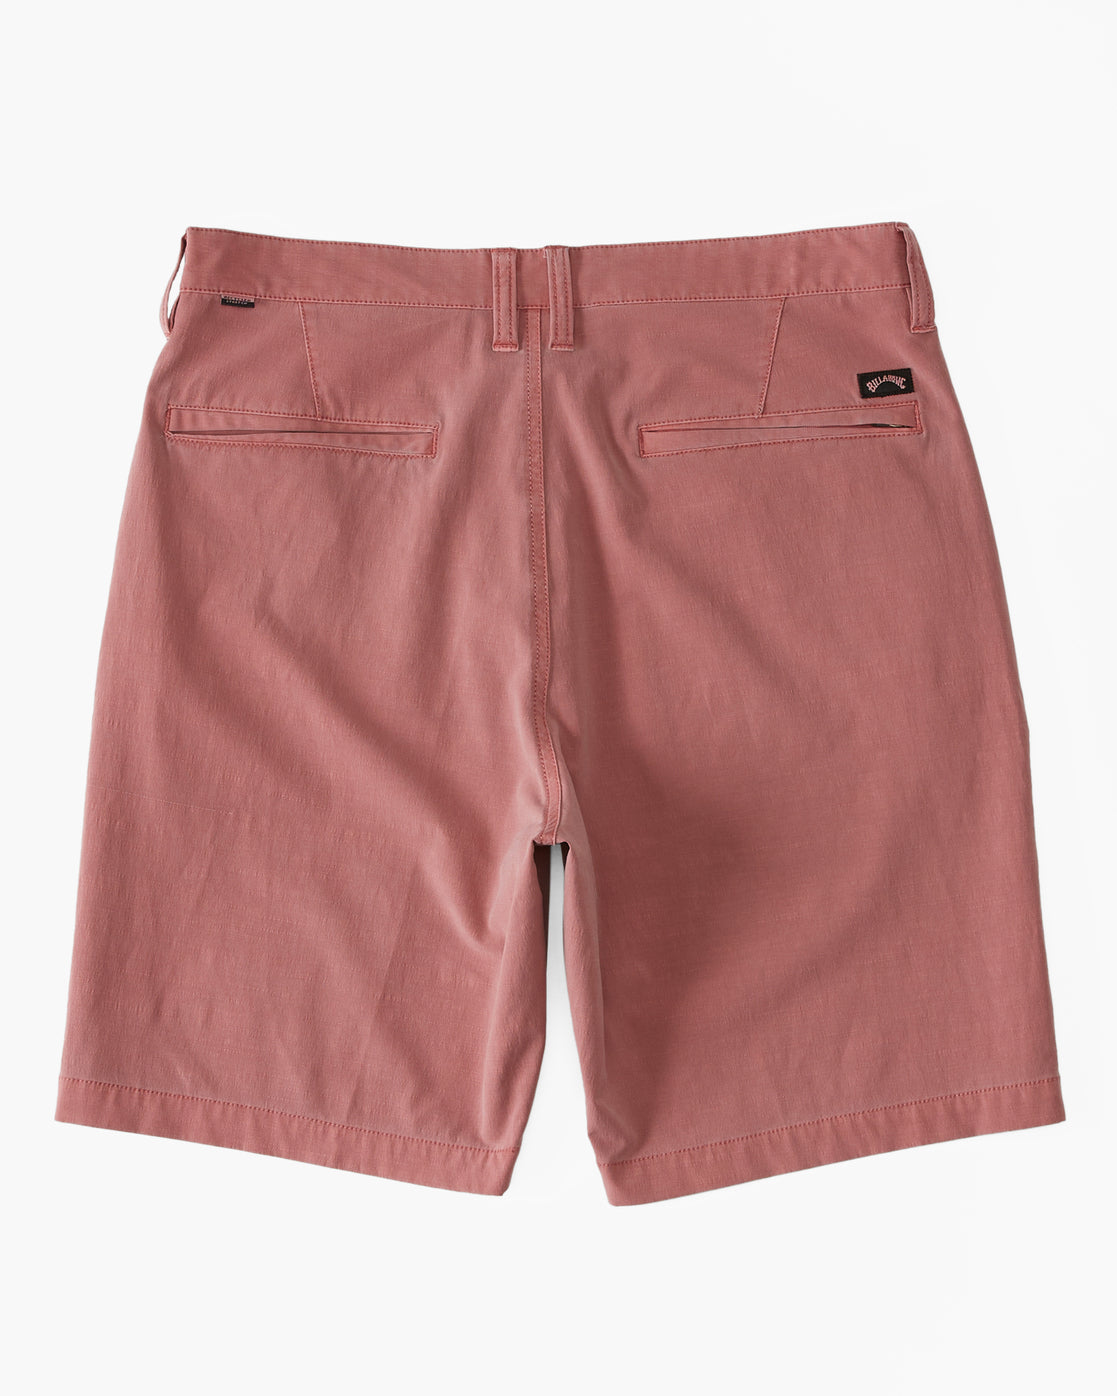 Crossfire Wave Washed 18" Hybrid Submersible Shorts - Coral